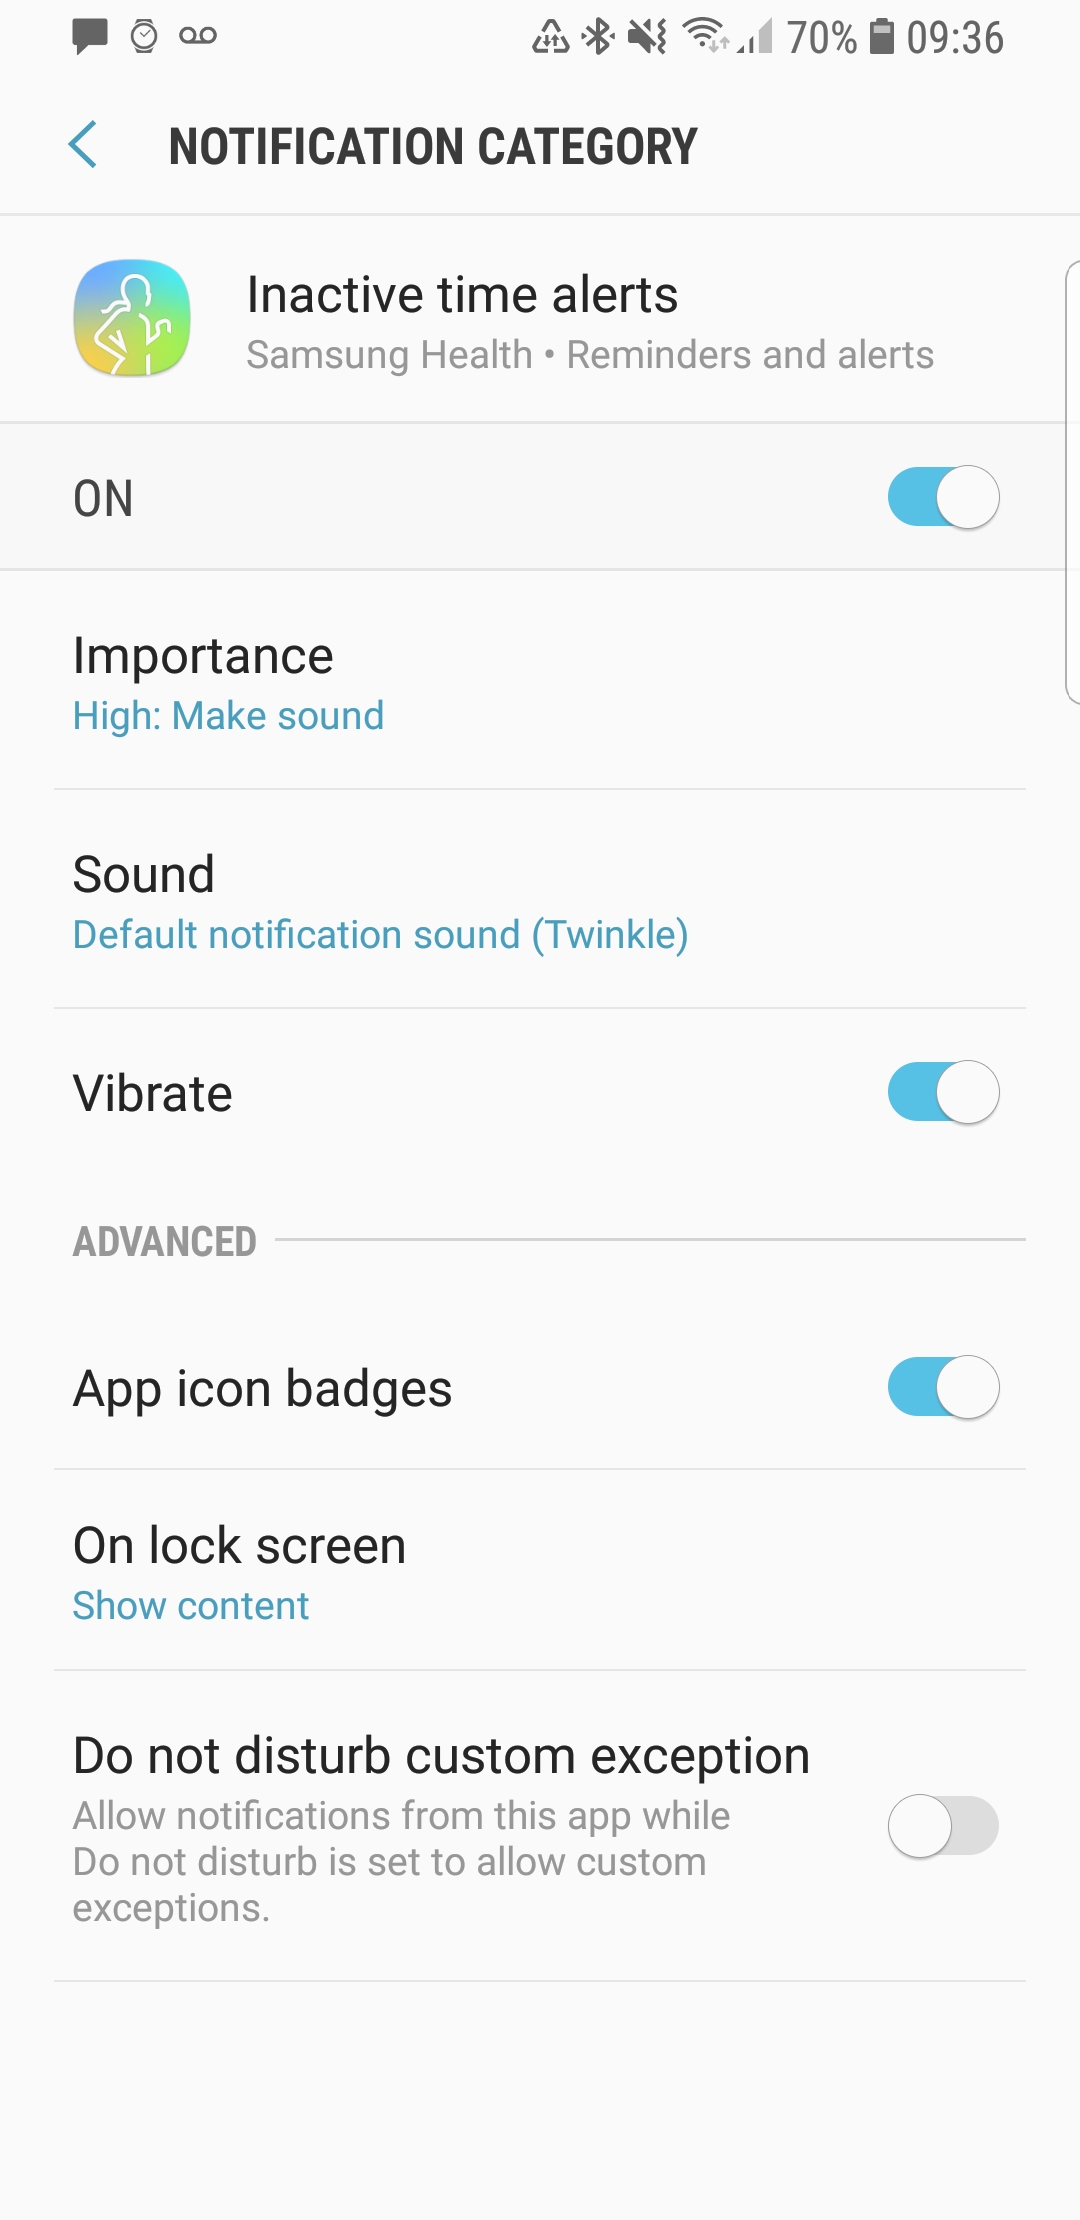 Manage notifications and alerts in Samsung Health